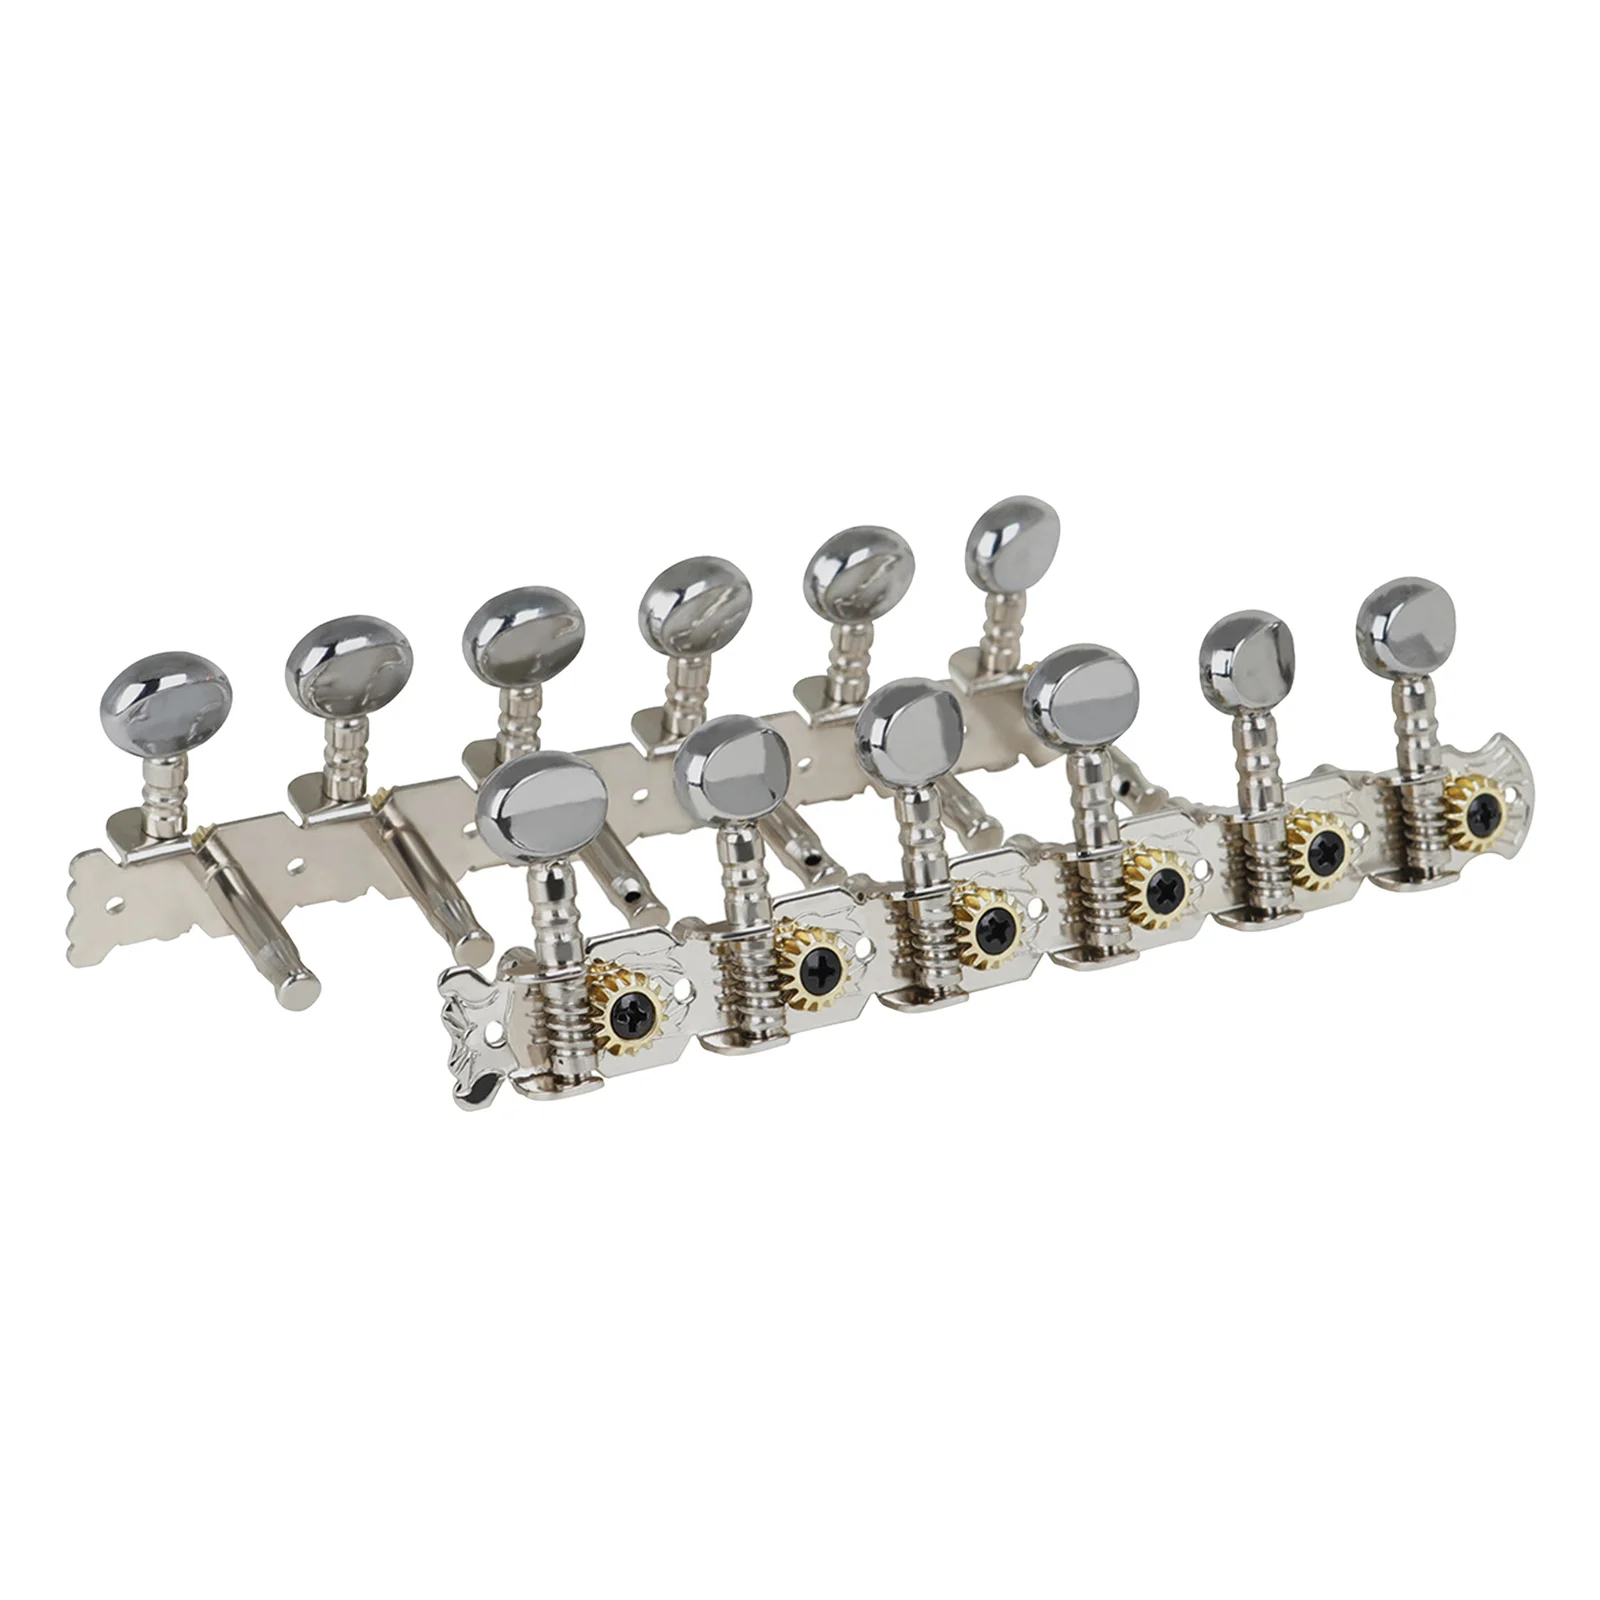 

Retro 12-string Guitar Tuning Keys Pegs Open Tuners String Tuner Knob Round Guitar Accs Replace Broken Parts